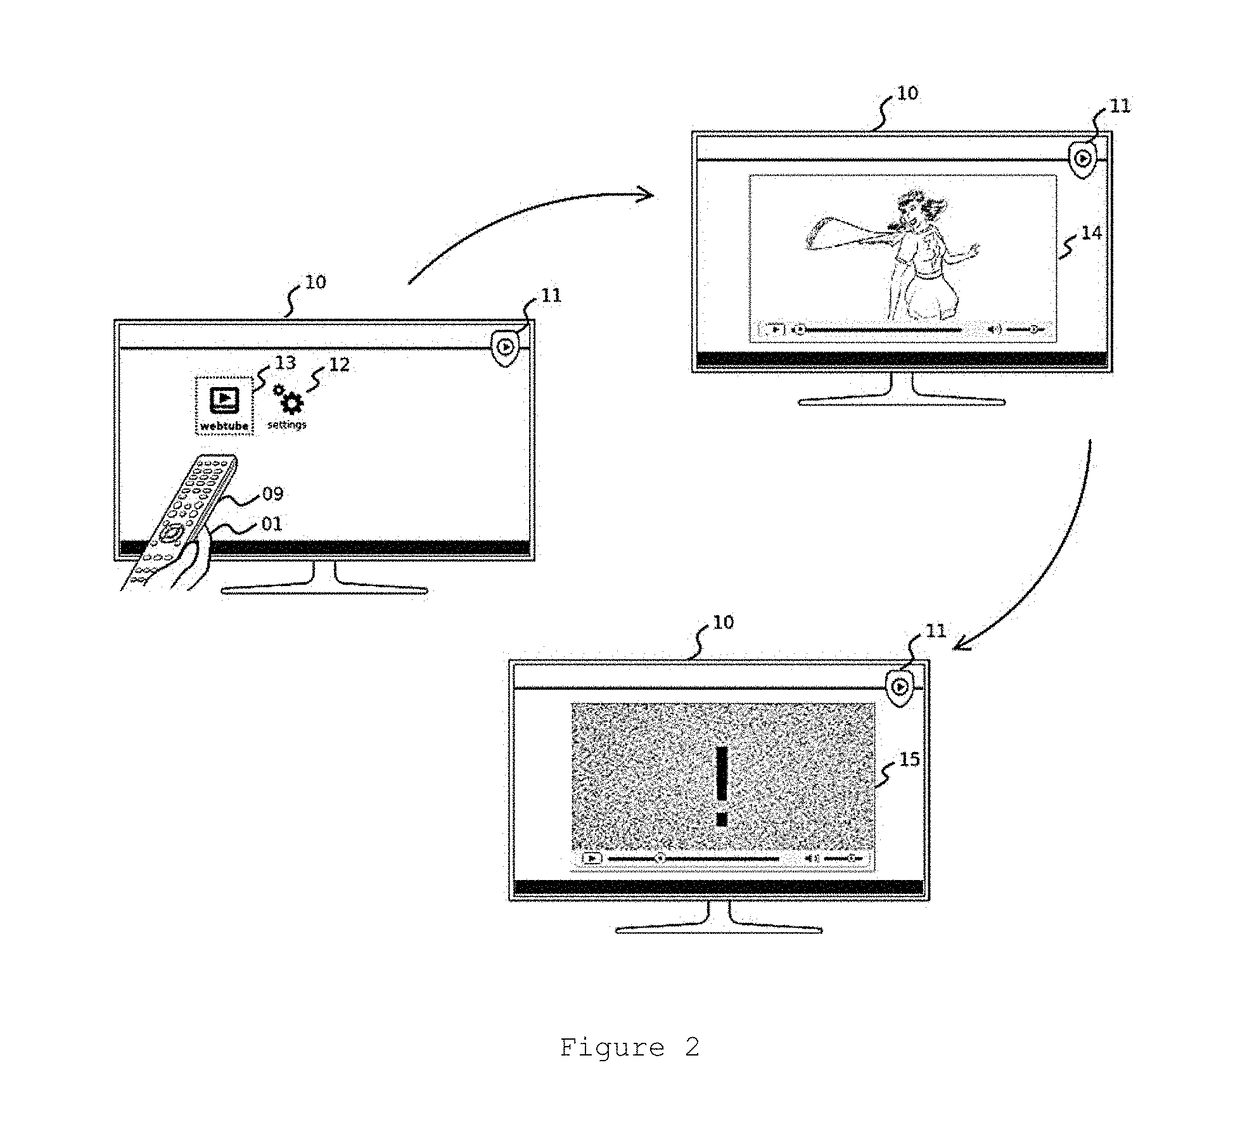 Multimodal and real-time method for filtering sensitive media